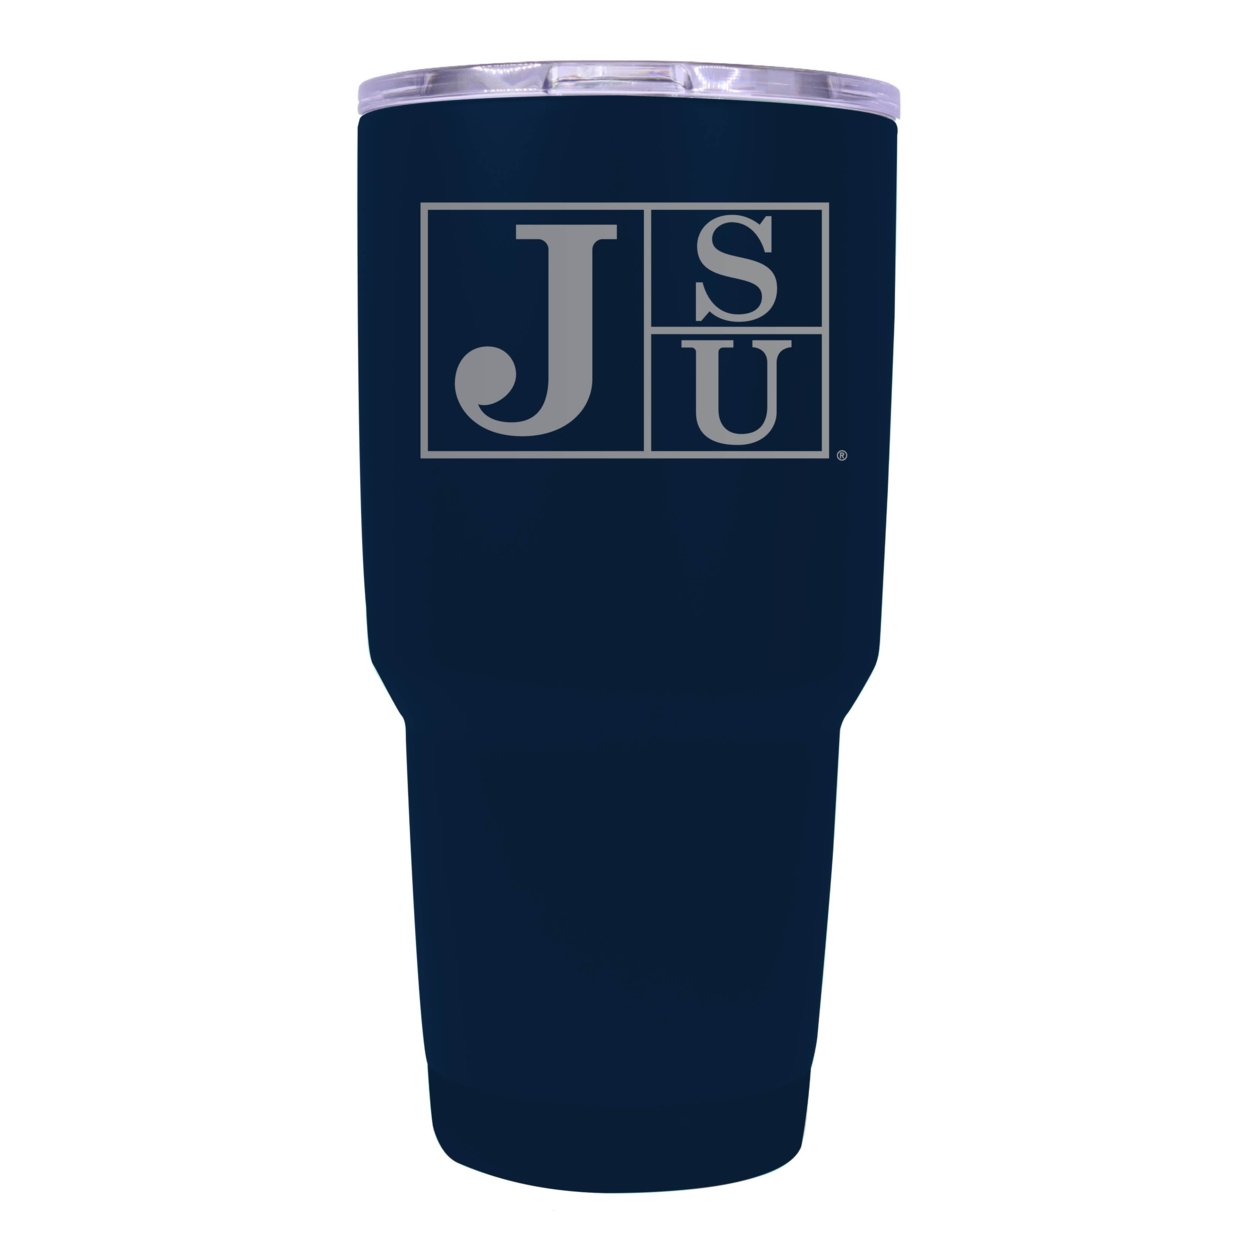 Jackson State University 24 Oz Laser Engraved Stainless Steel Insulated Tumbler - Choose Your Color. - Navy